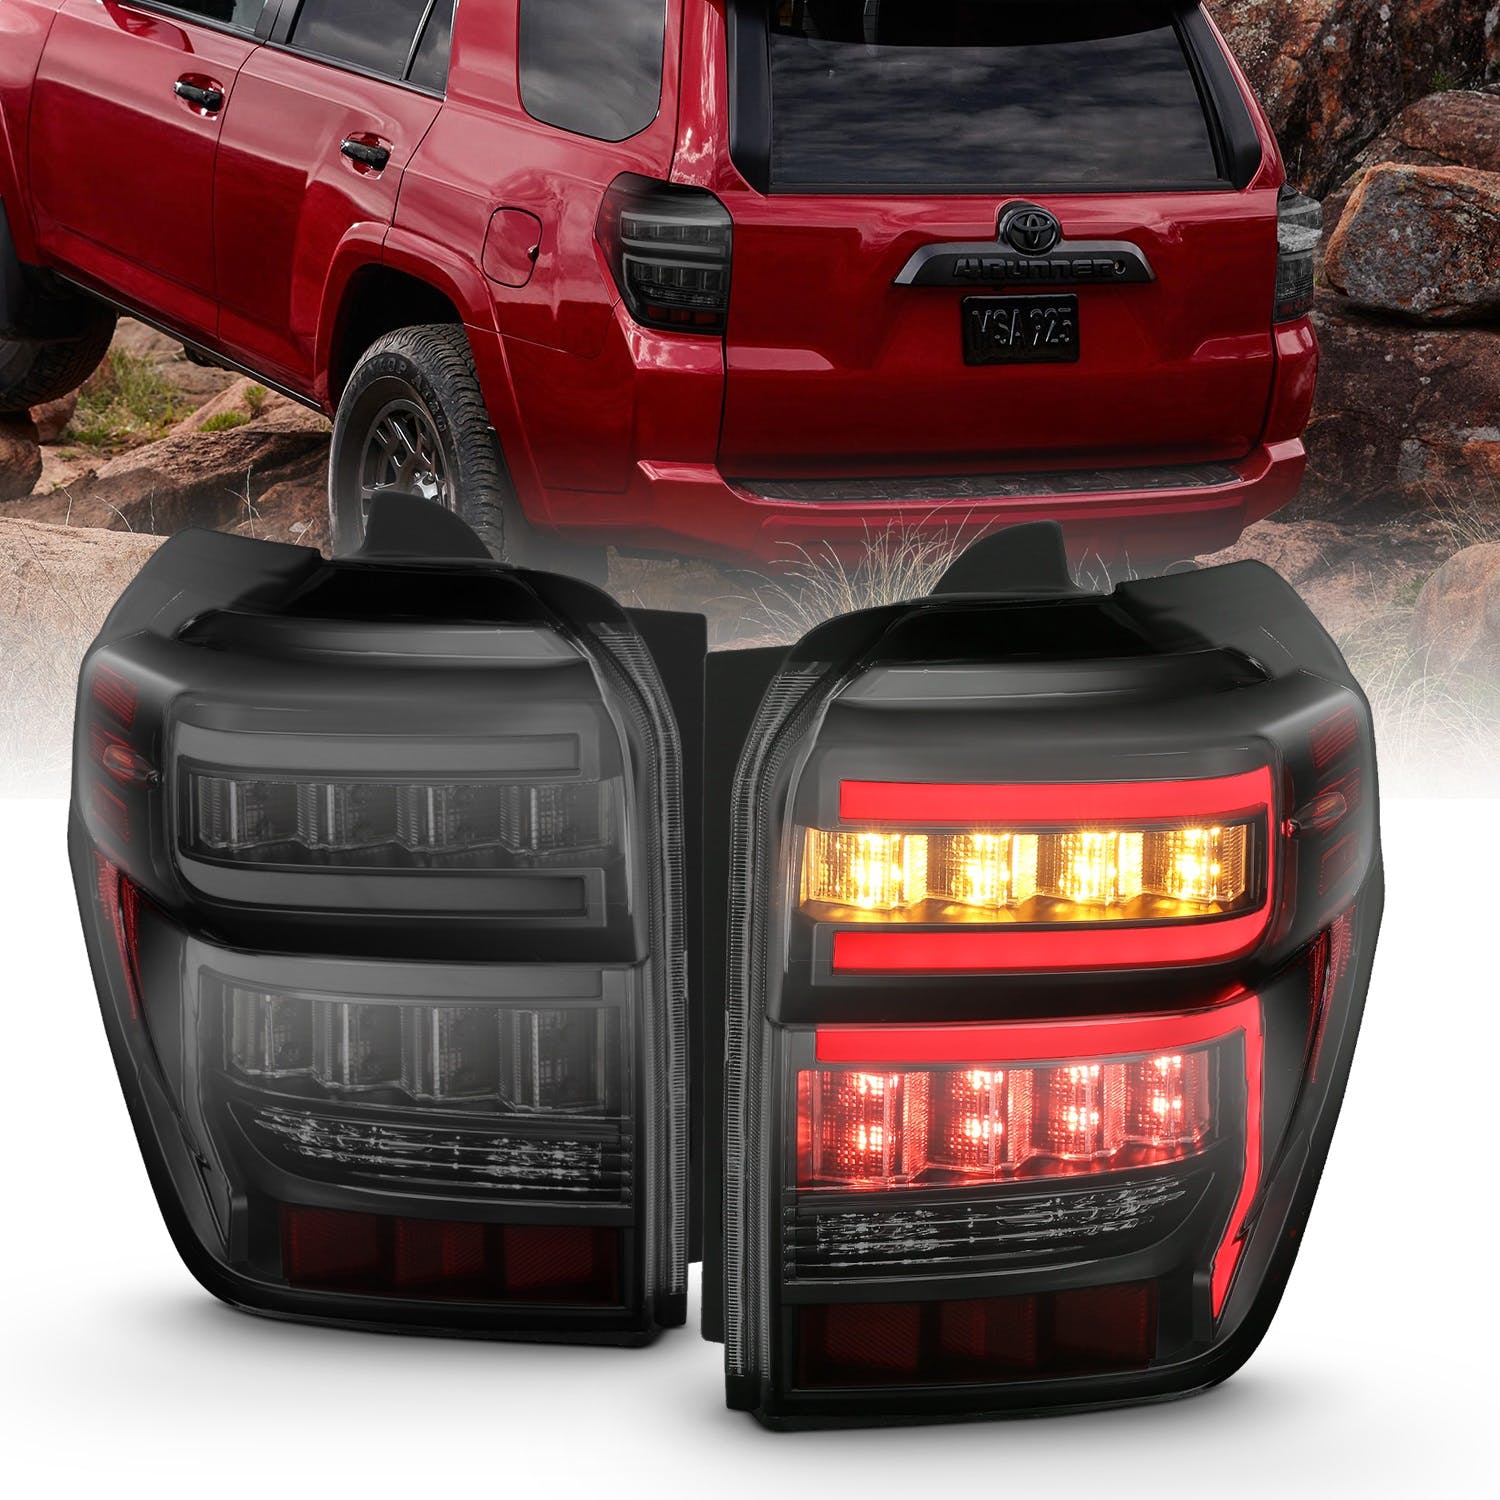 AnzoUSA 311312 Tail Lights Black Housing Smoke Lens Red Light Bar With sequential